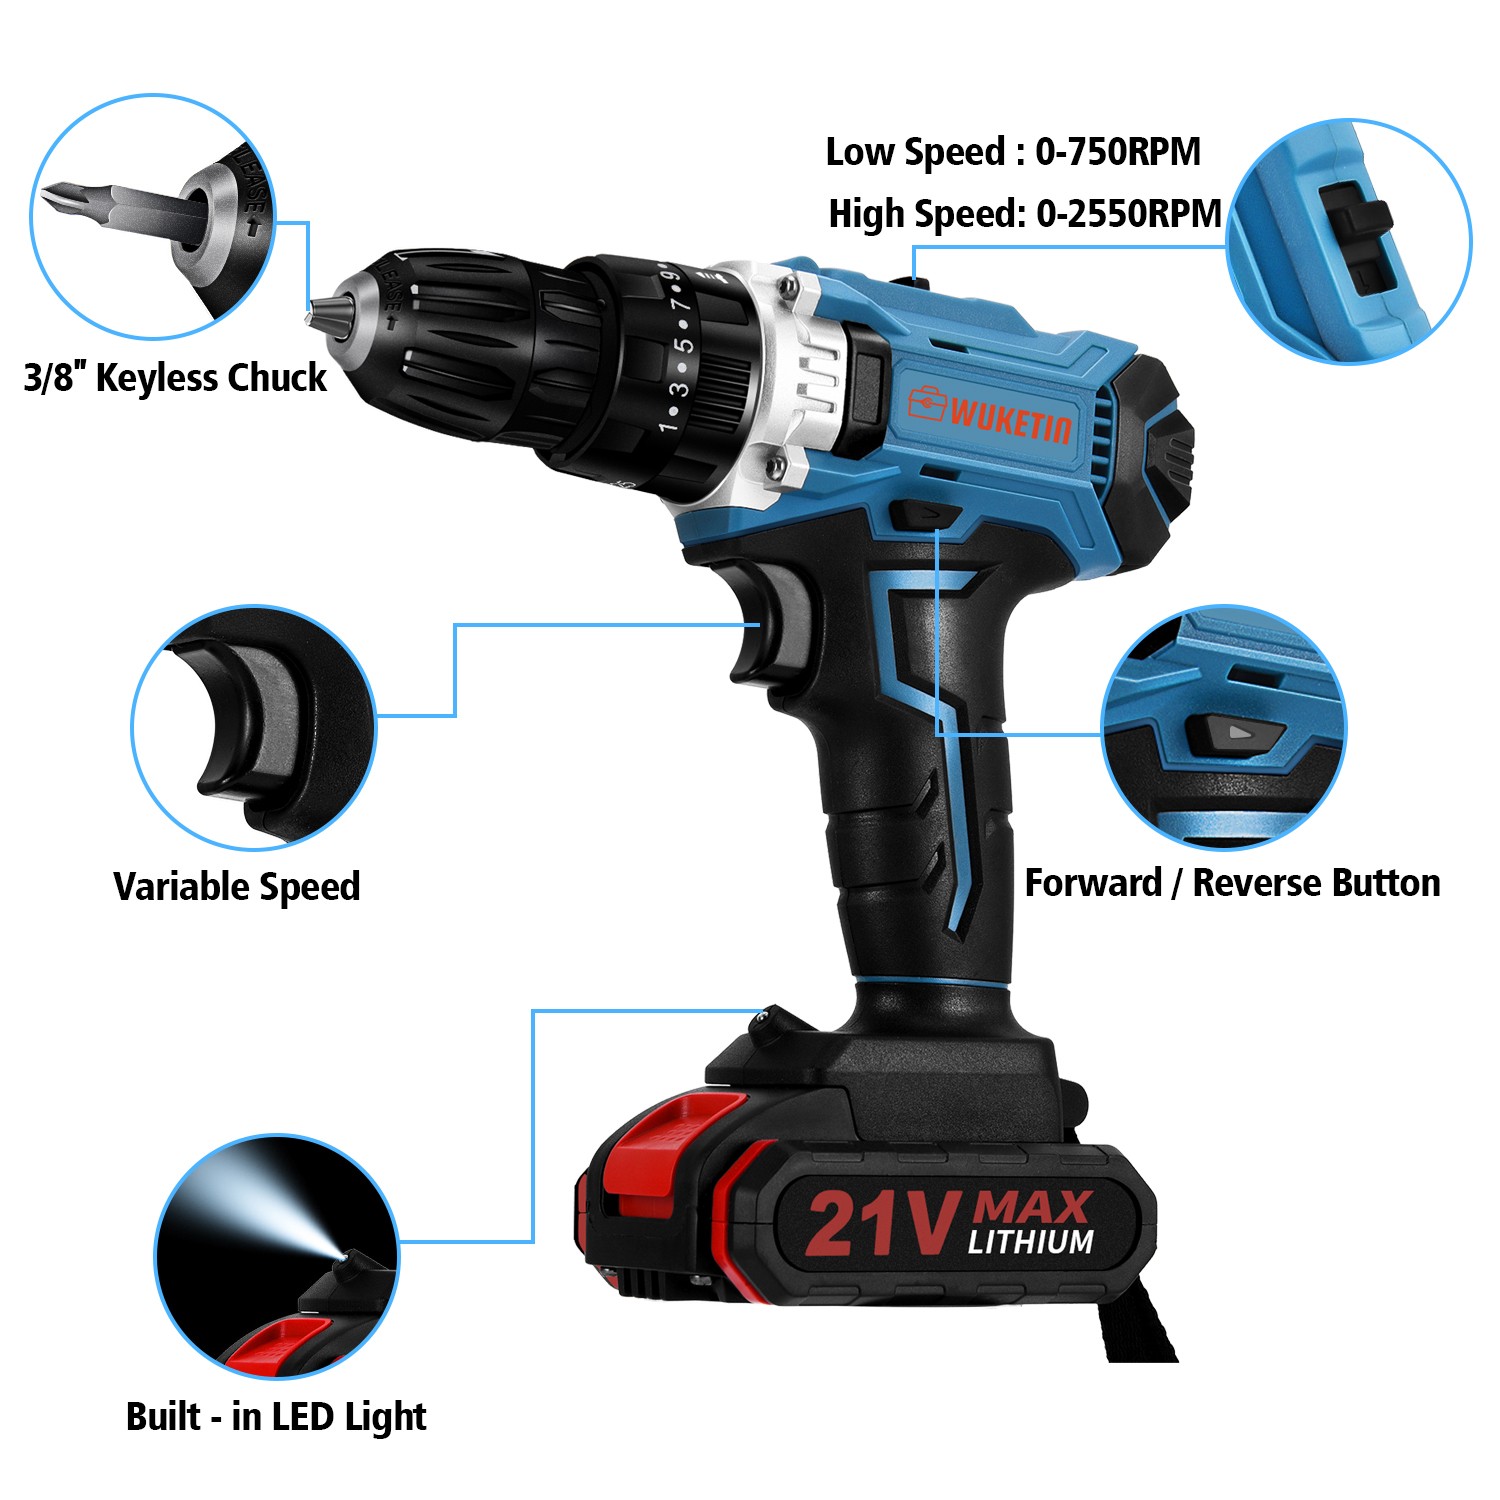 BLUELK 21V Cordless Drill/Driver Kit, 3/8-inch Electric Drill Set with 2  Batteries, Variable Speed 